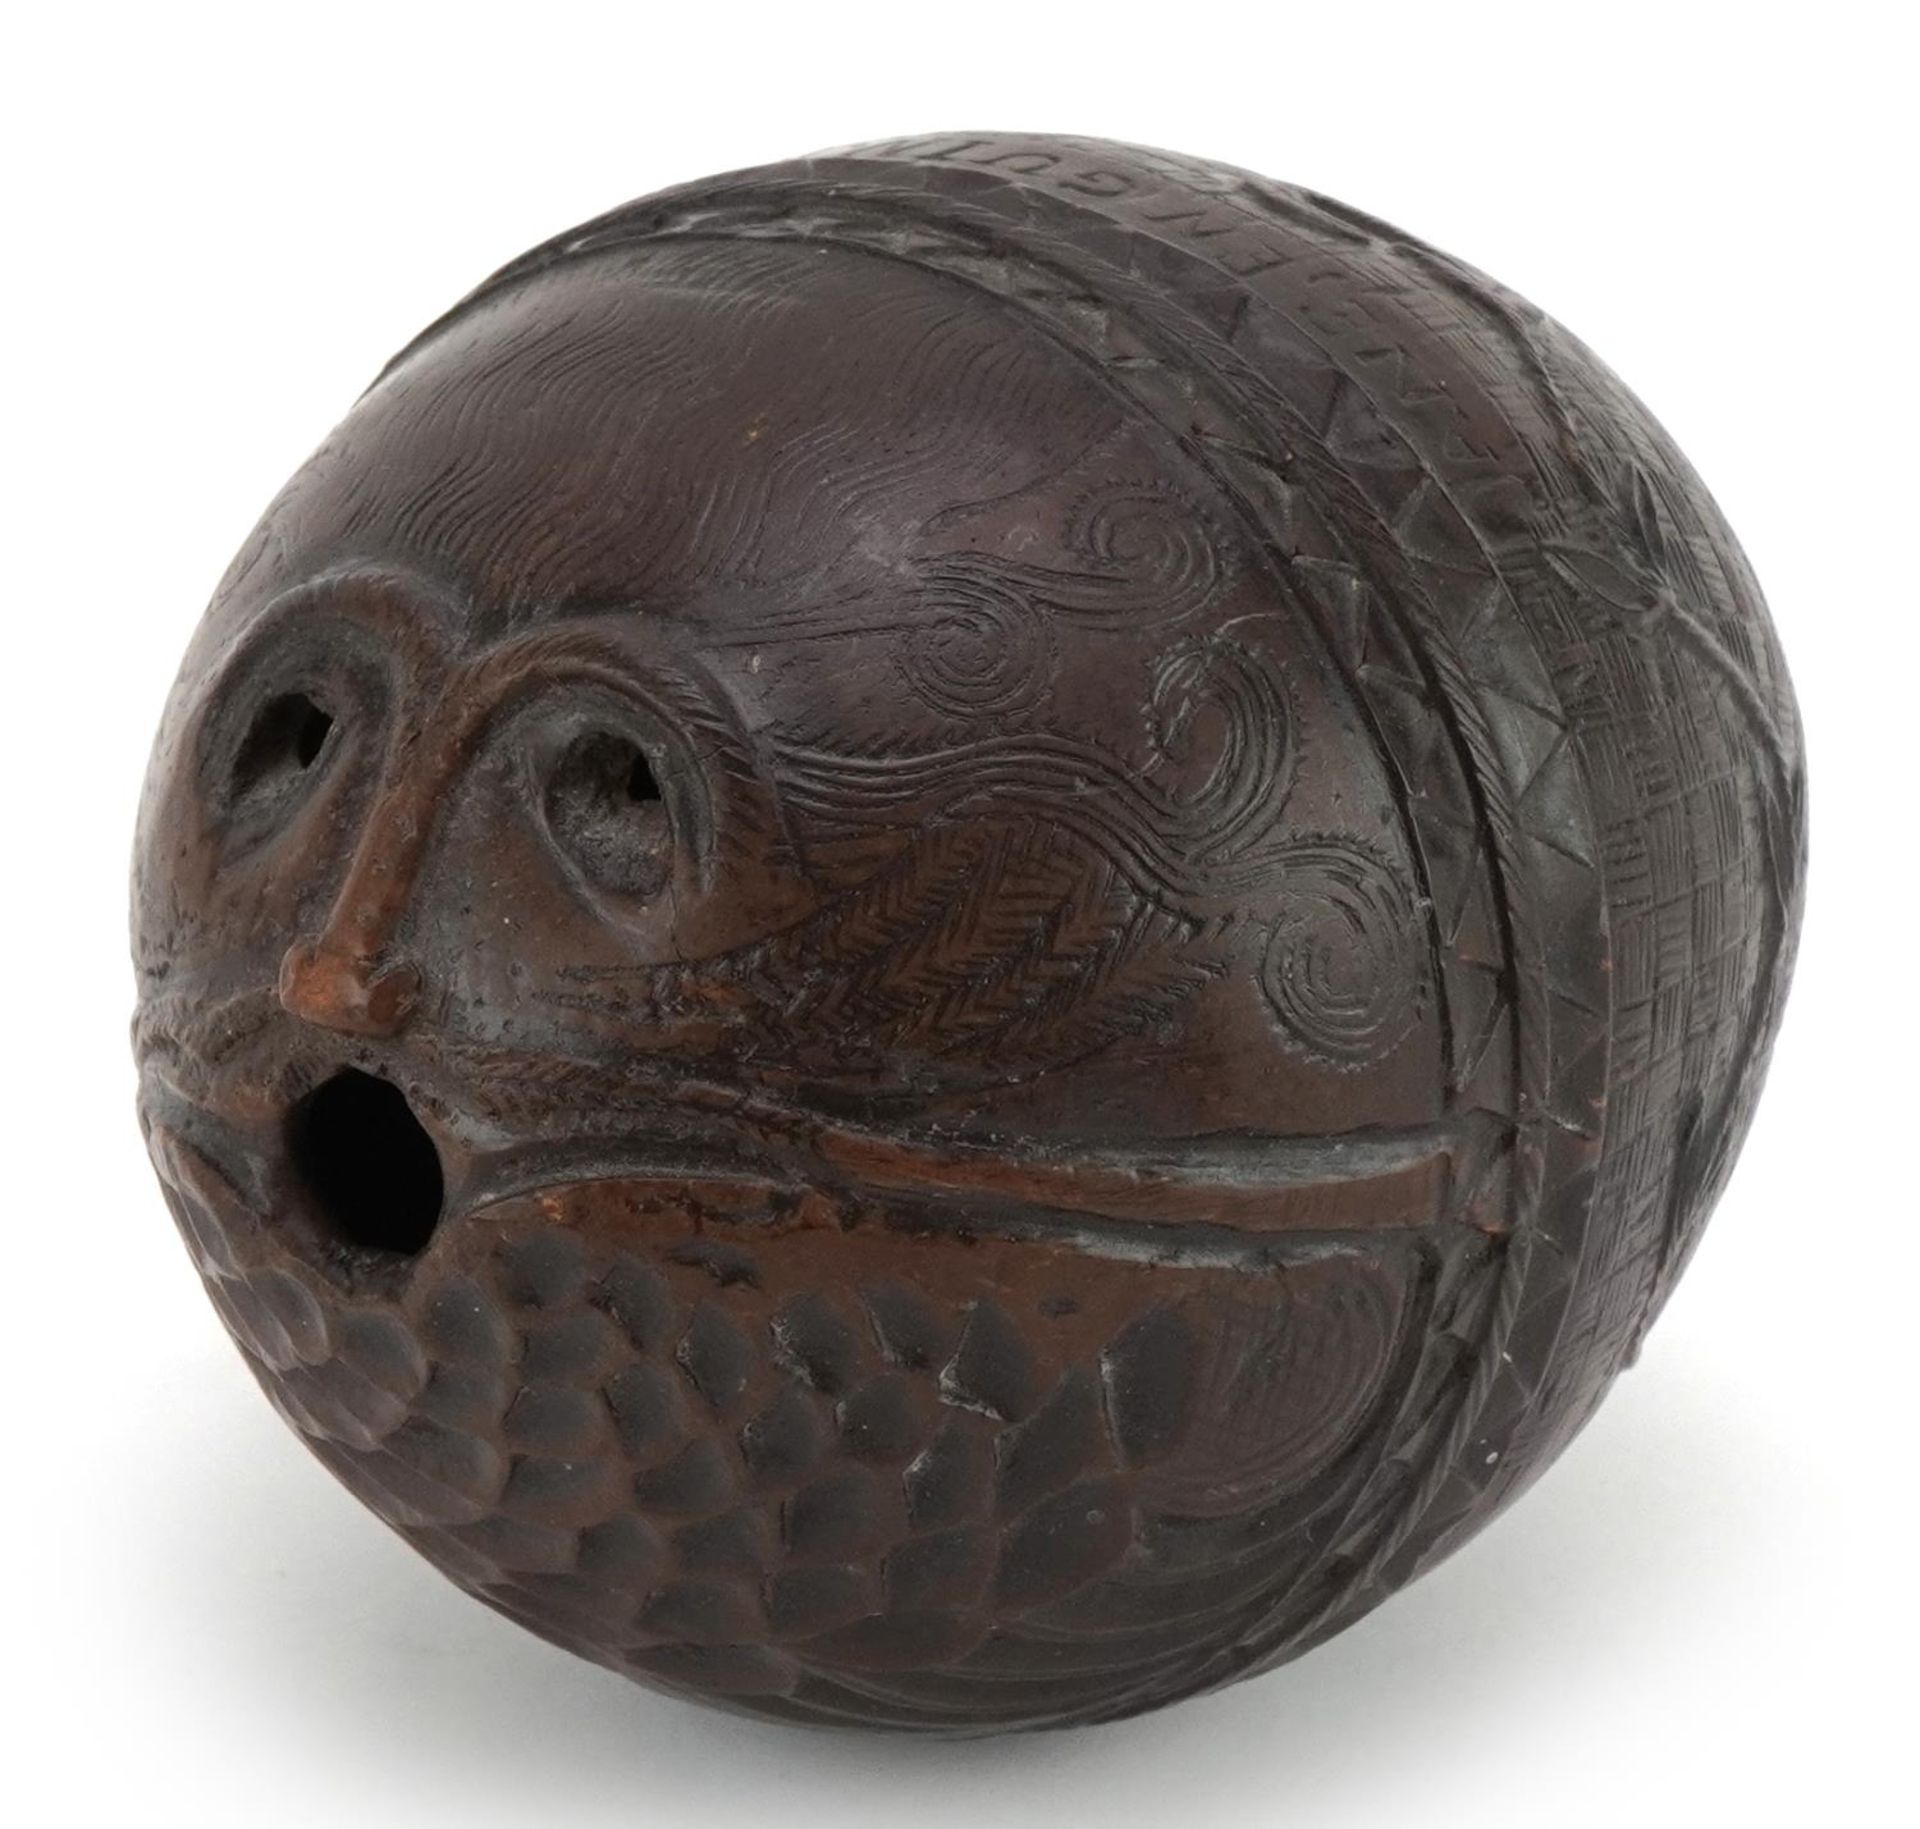 Antique coconut shell carved in the form of a bearded man inscribed Jane En Guin Martin EnGuin, 12.